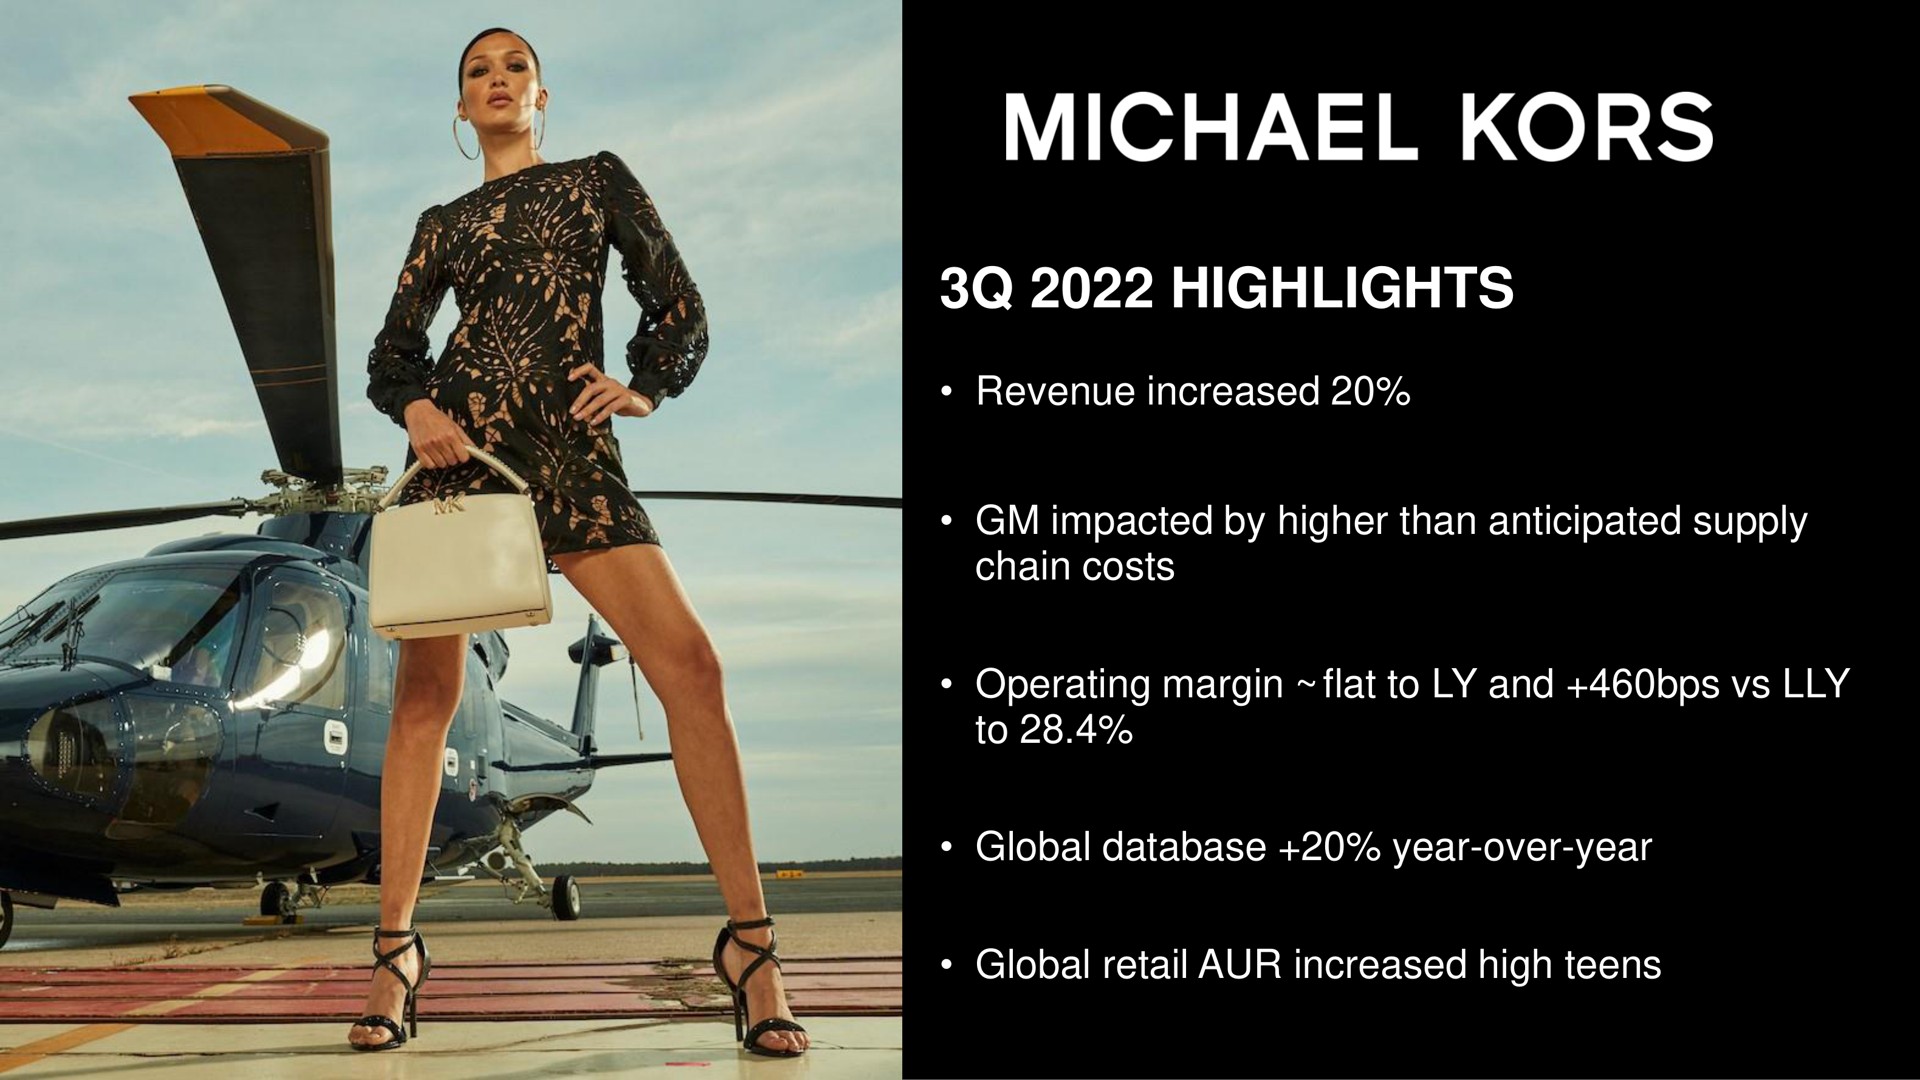 highlights revenue increased impacted by higher than anticipated supply chain costs operating margin flat to and to global year over year global retail increased high teens kors | Capri Holdings